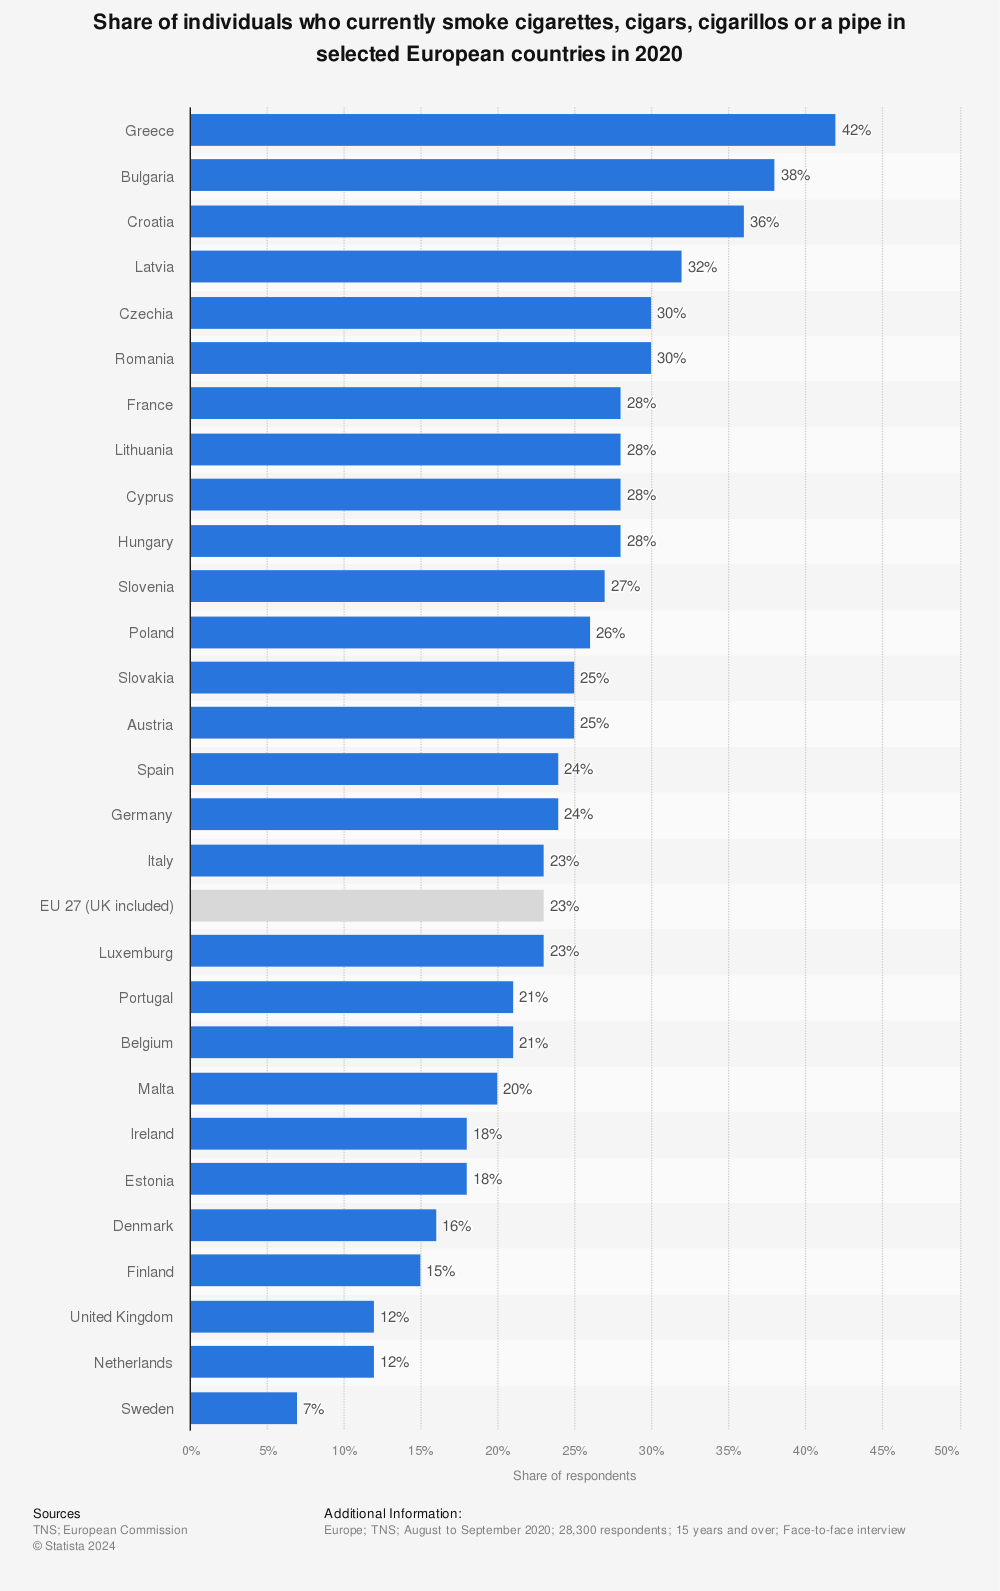 Statistic: Share of individuals who currently smoke cigarettes, cigars, cigarillos or a pipe in selected European countries in 2020 | Statista